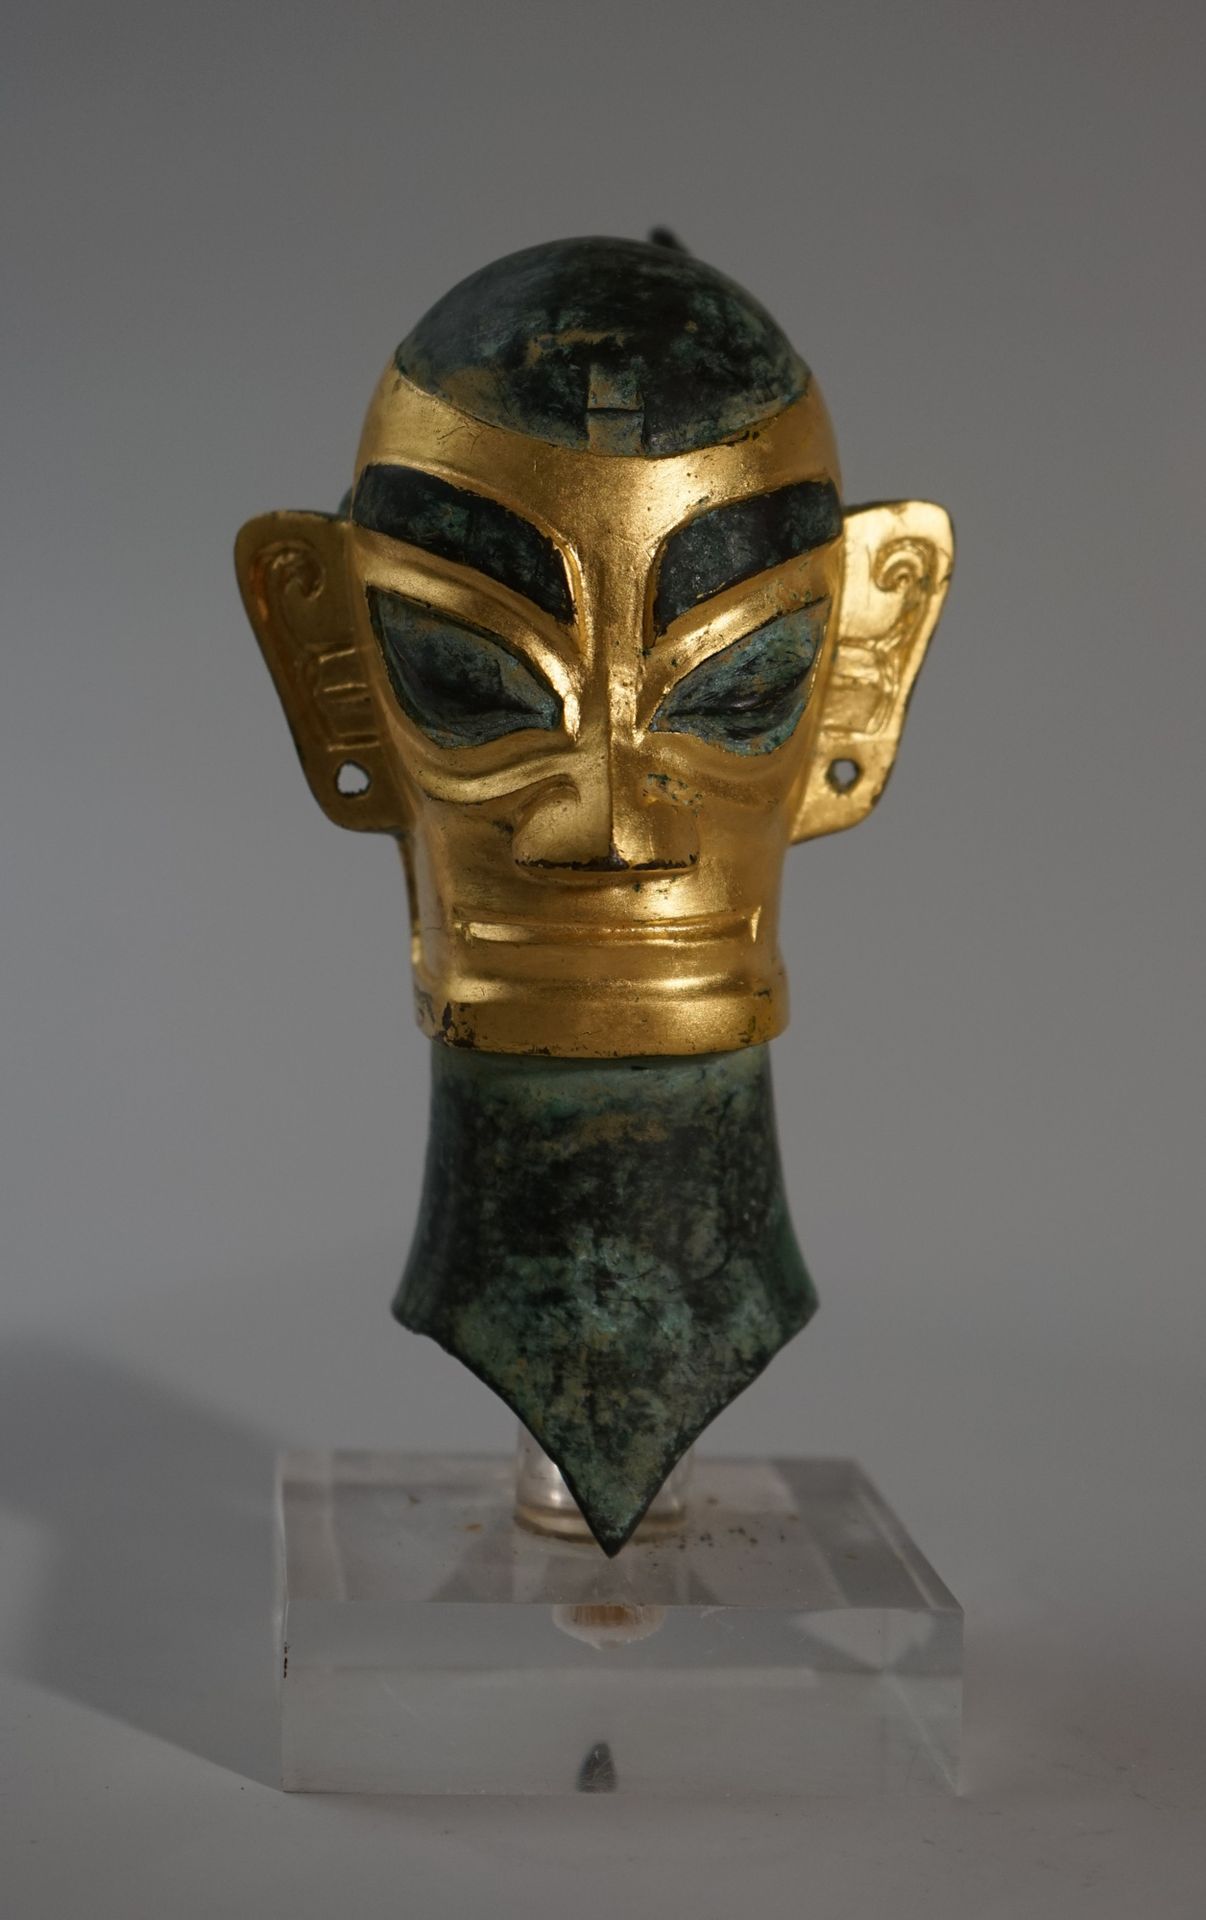 Null Head in bronze with green and gold patina. MAWANGDUI style, China

H: 16 cm&hellip;